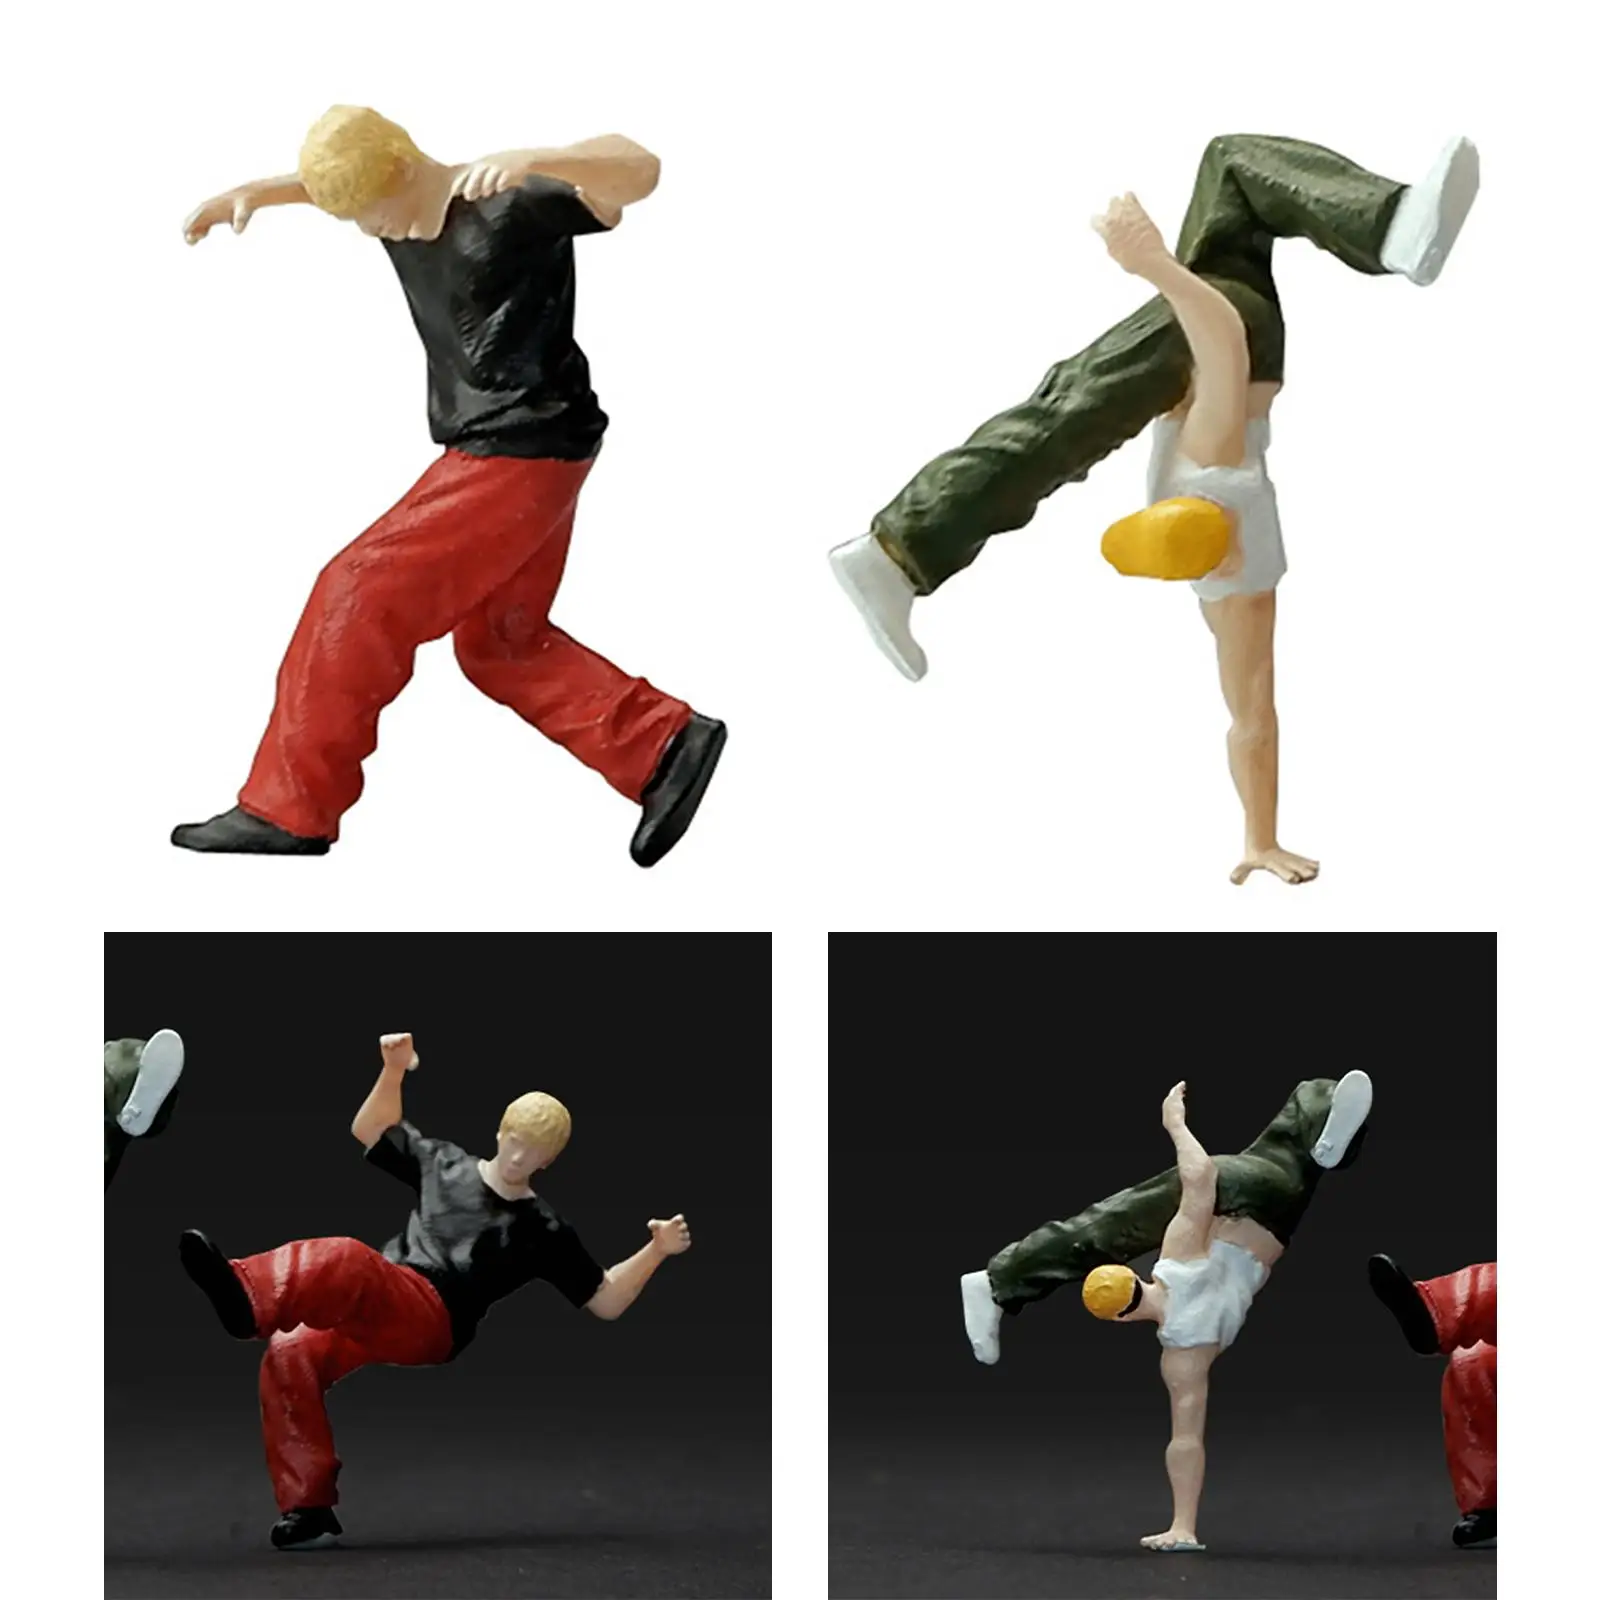 1:64 Figure Street Dancer Miniature Scenes Handpainted Tiny People for Architecture Model DIY Projects Diorama Layout Sand Table